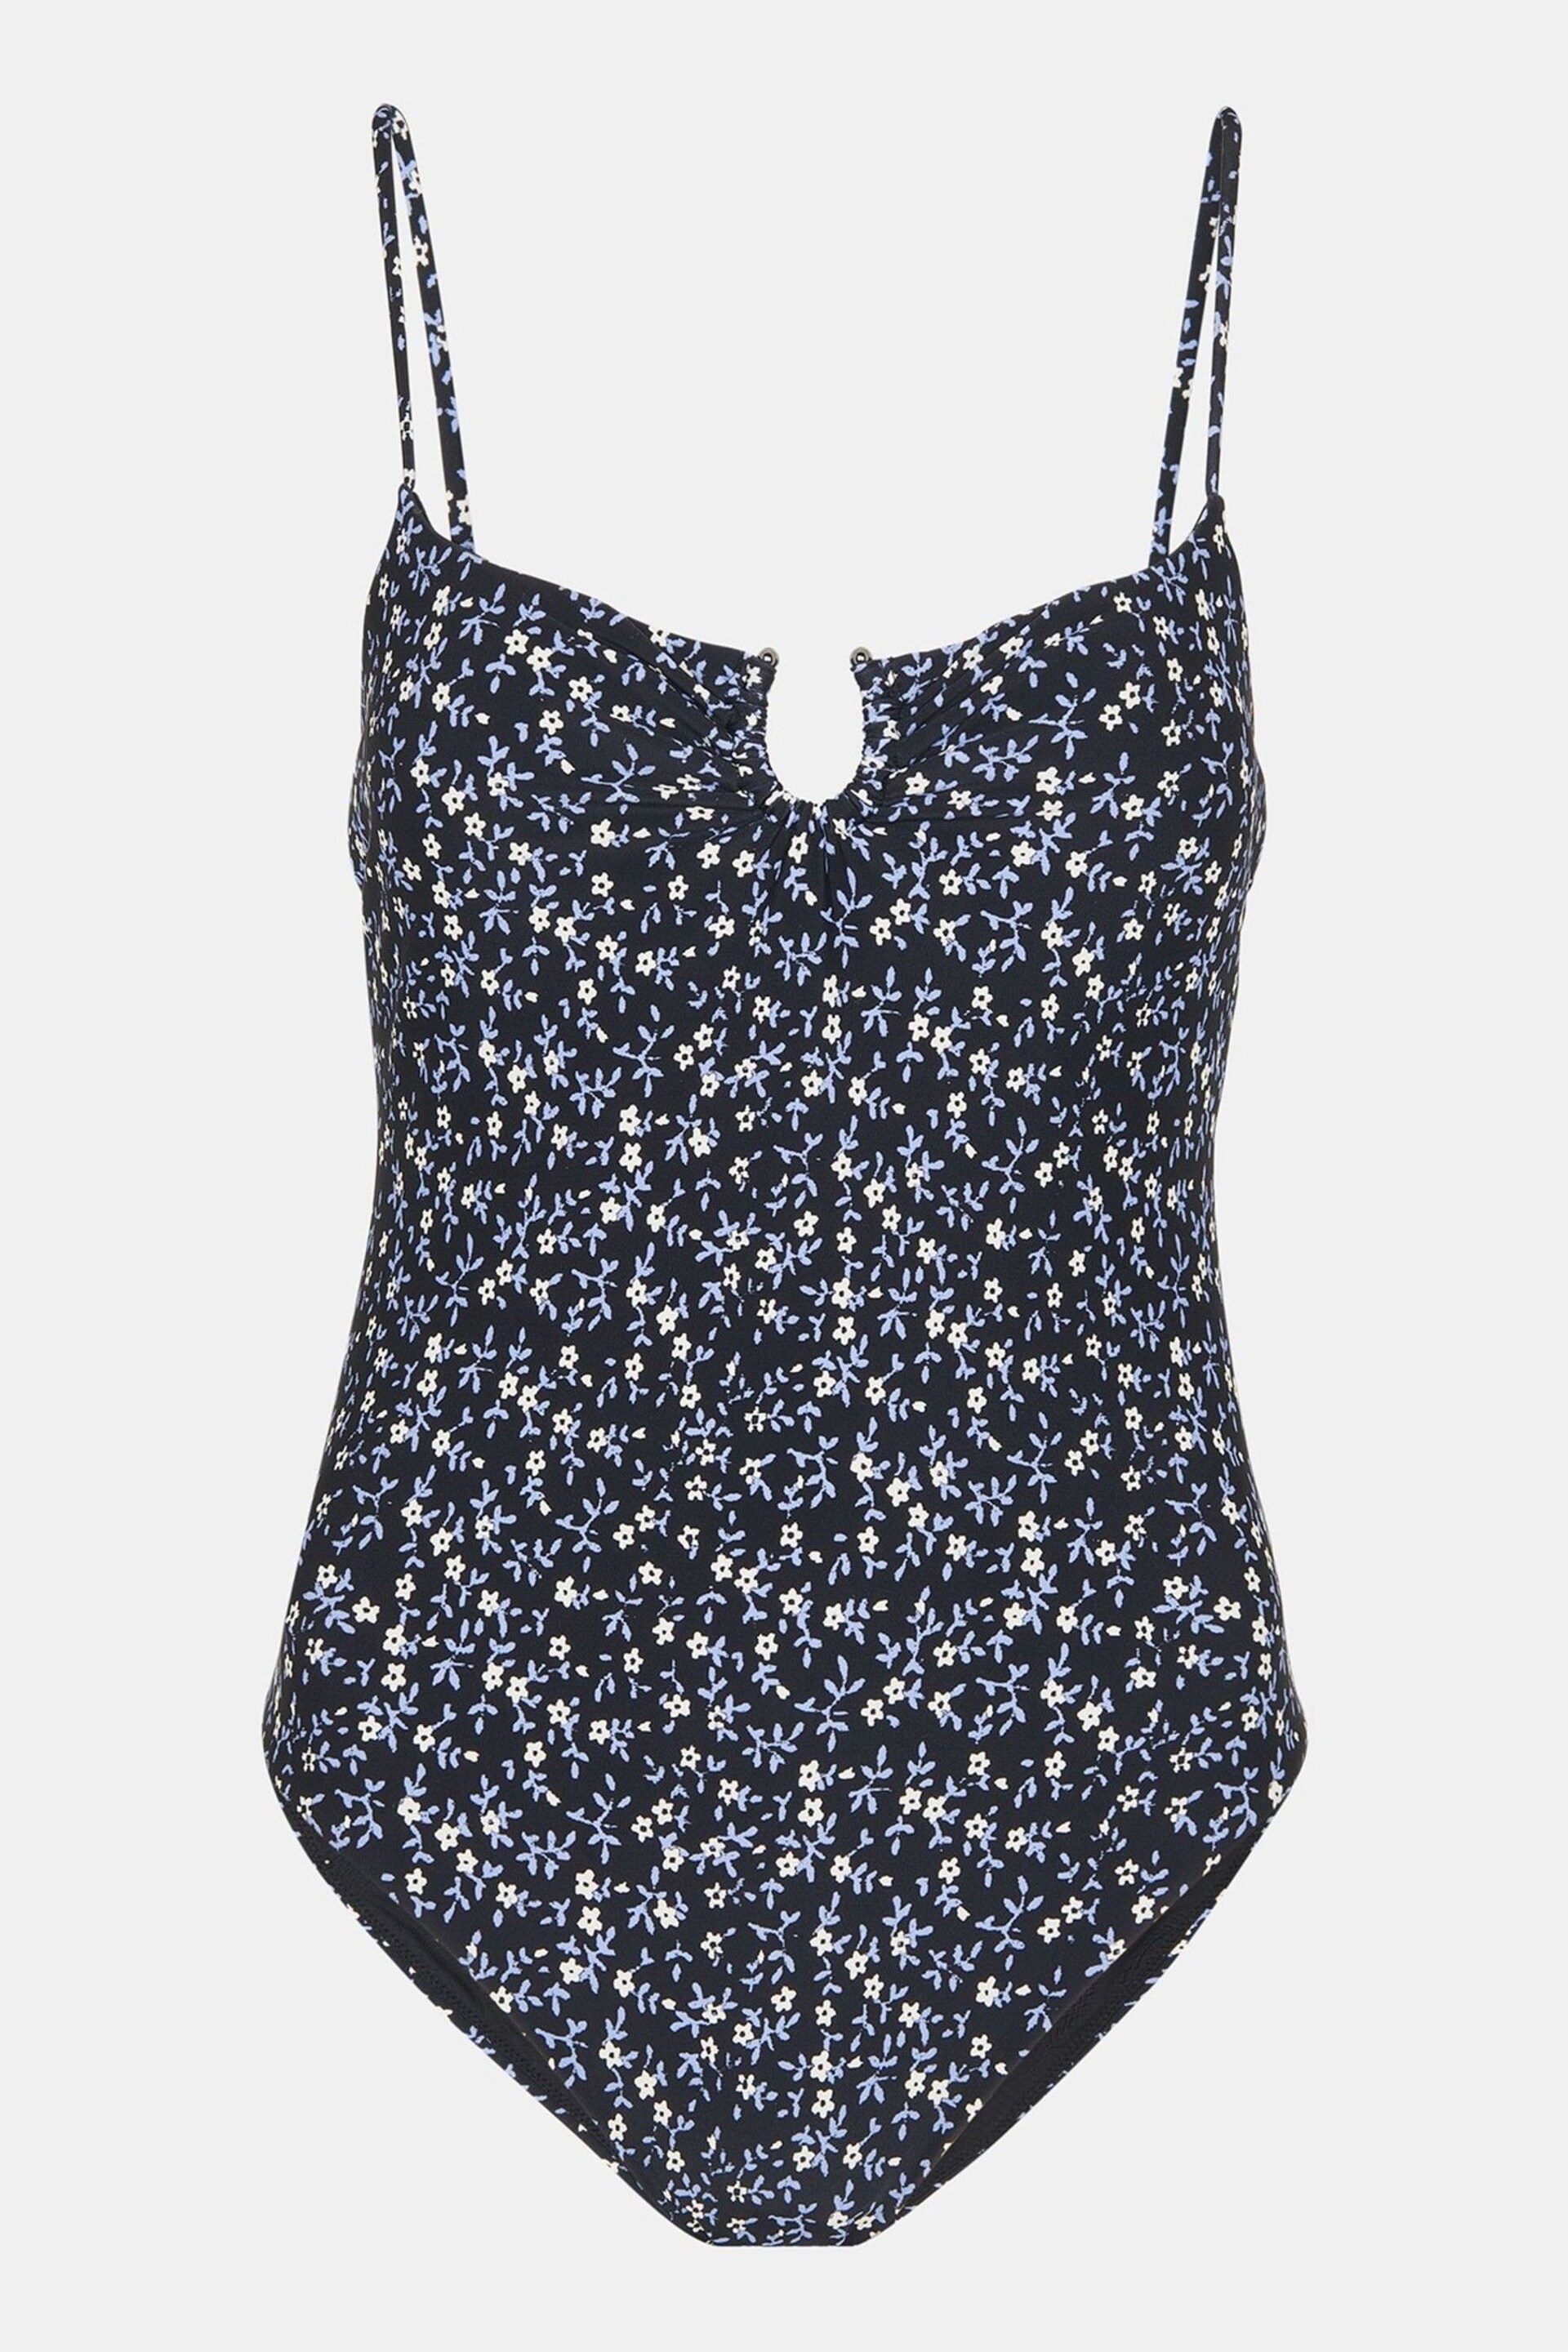 Whistles Forget Me Not Black Swimsuit - Image 5 of 5